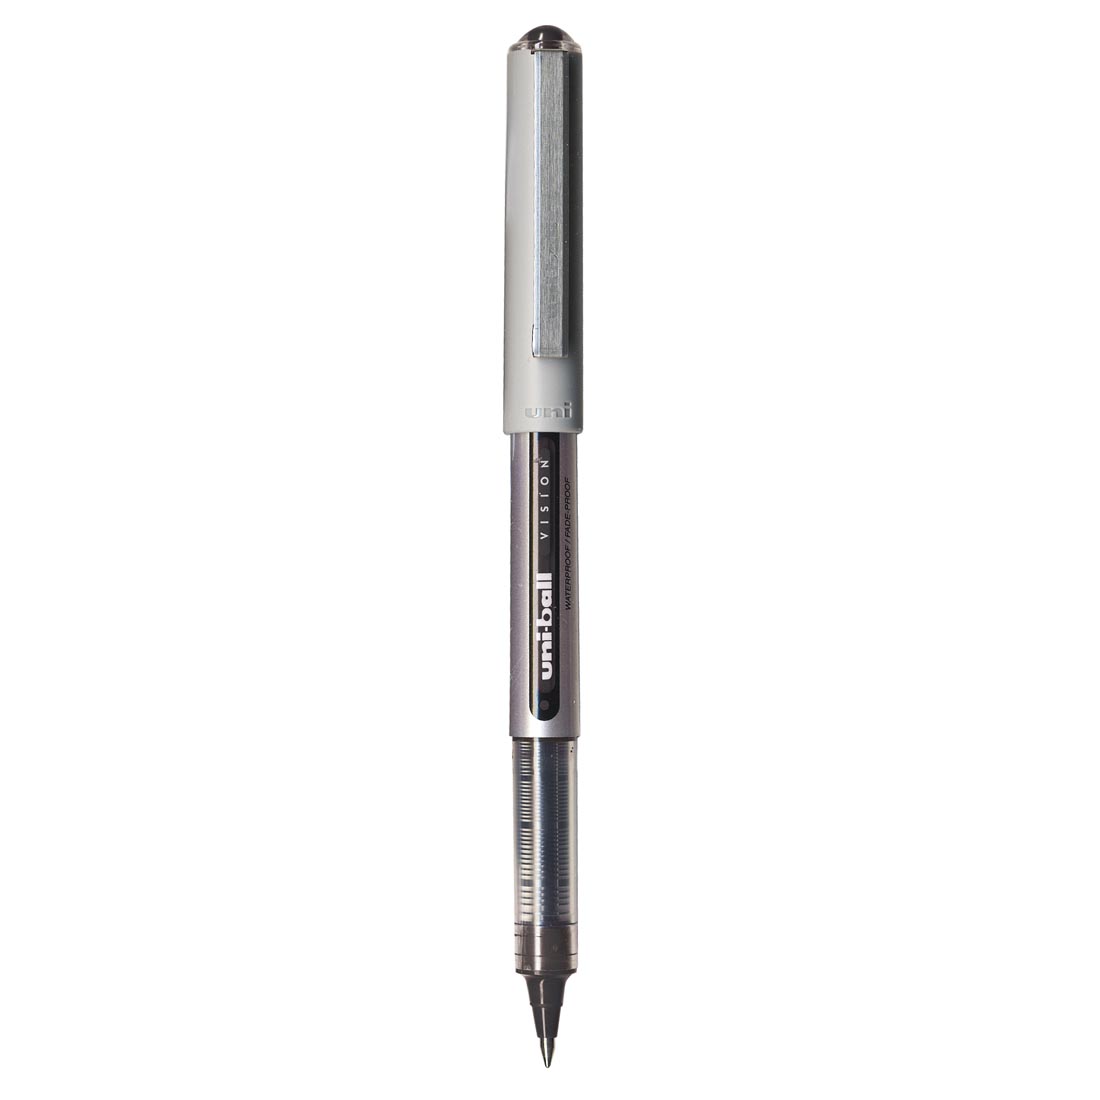 Black Uni-ball Vision Fine Tip Rollerball Pen with cap on opposite end